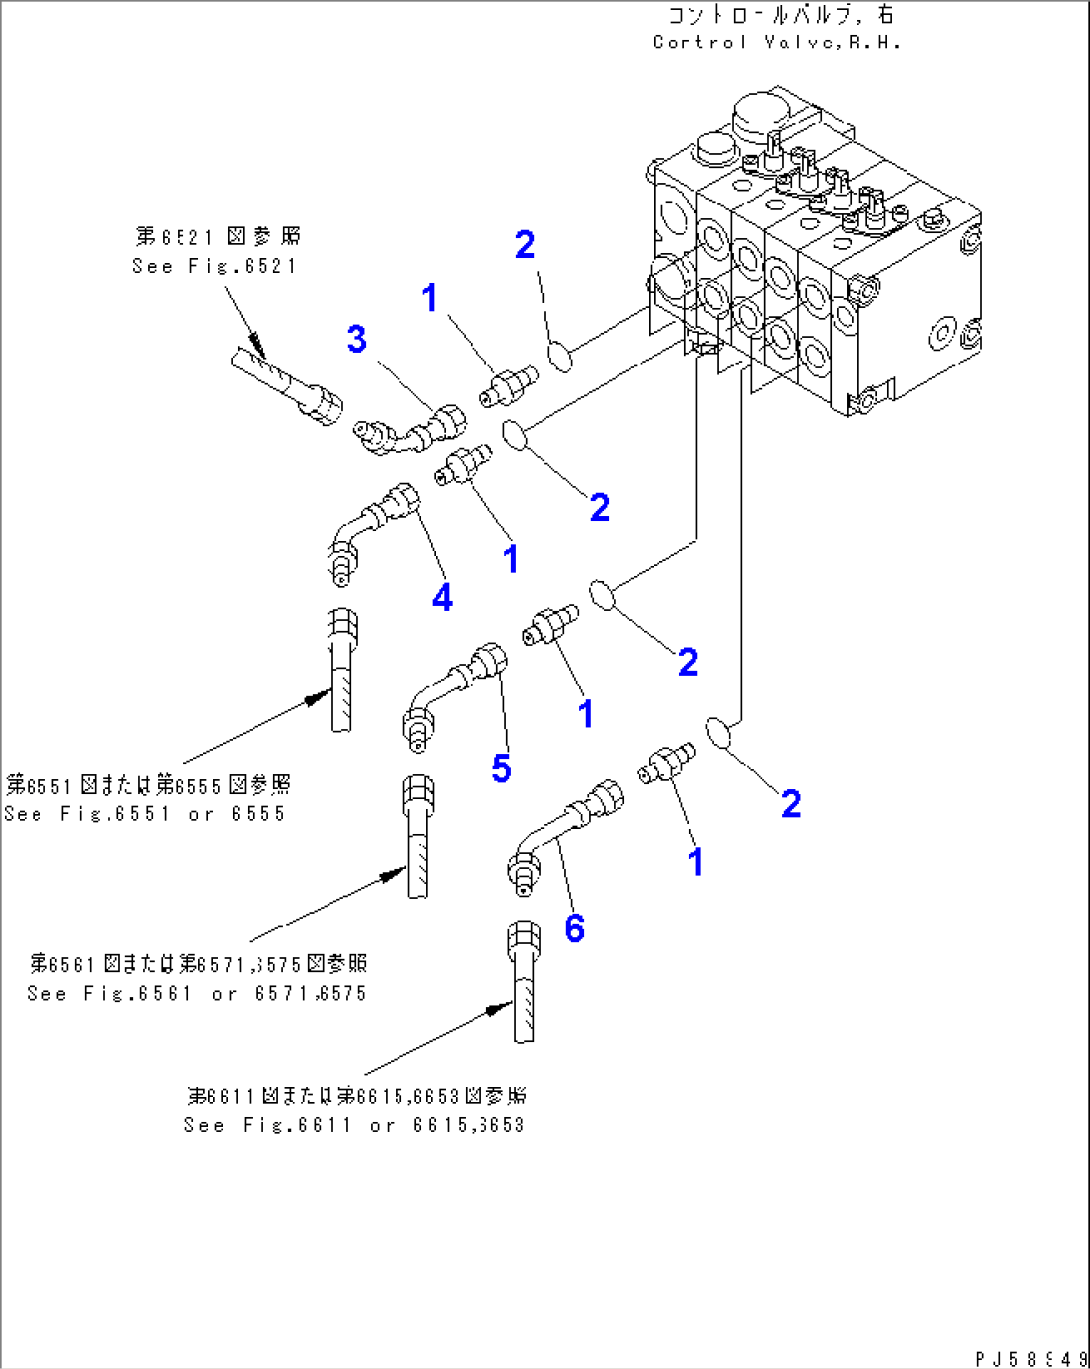 HYDRAULIC PIPING (CONTROL VALVE CONNECTING PARTS¤ R.H.) (WITH 4-SPOOL VALVE)